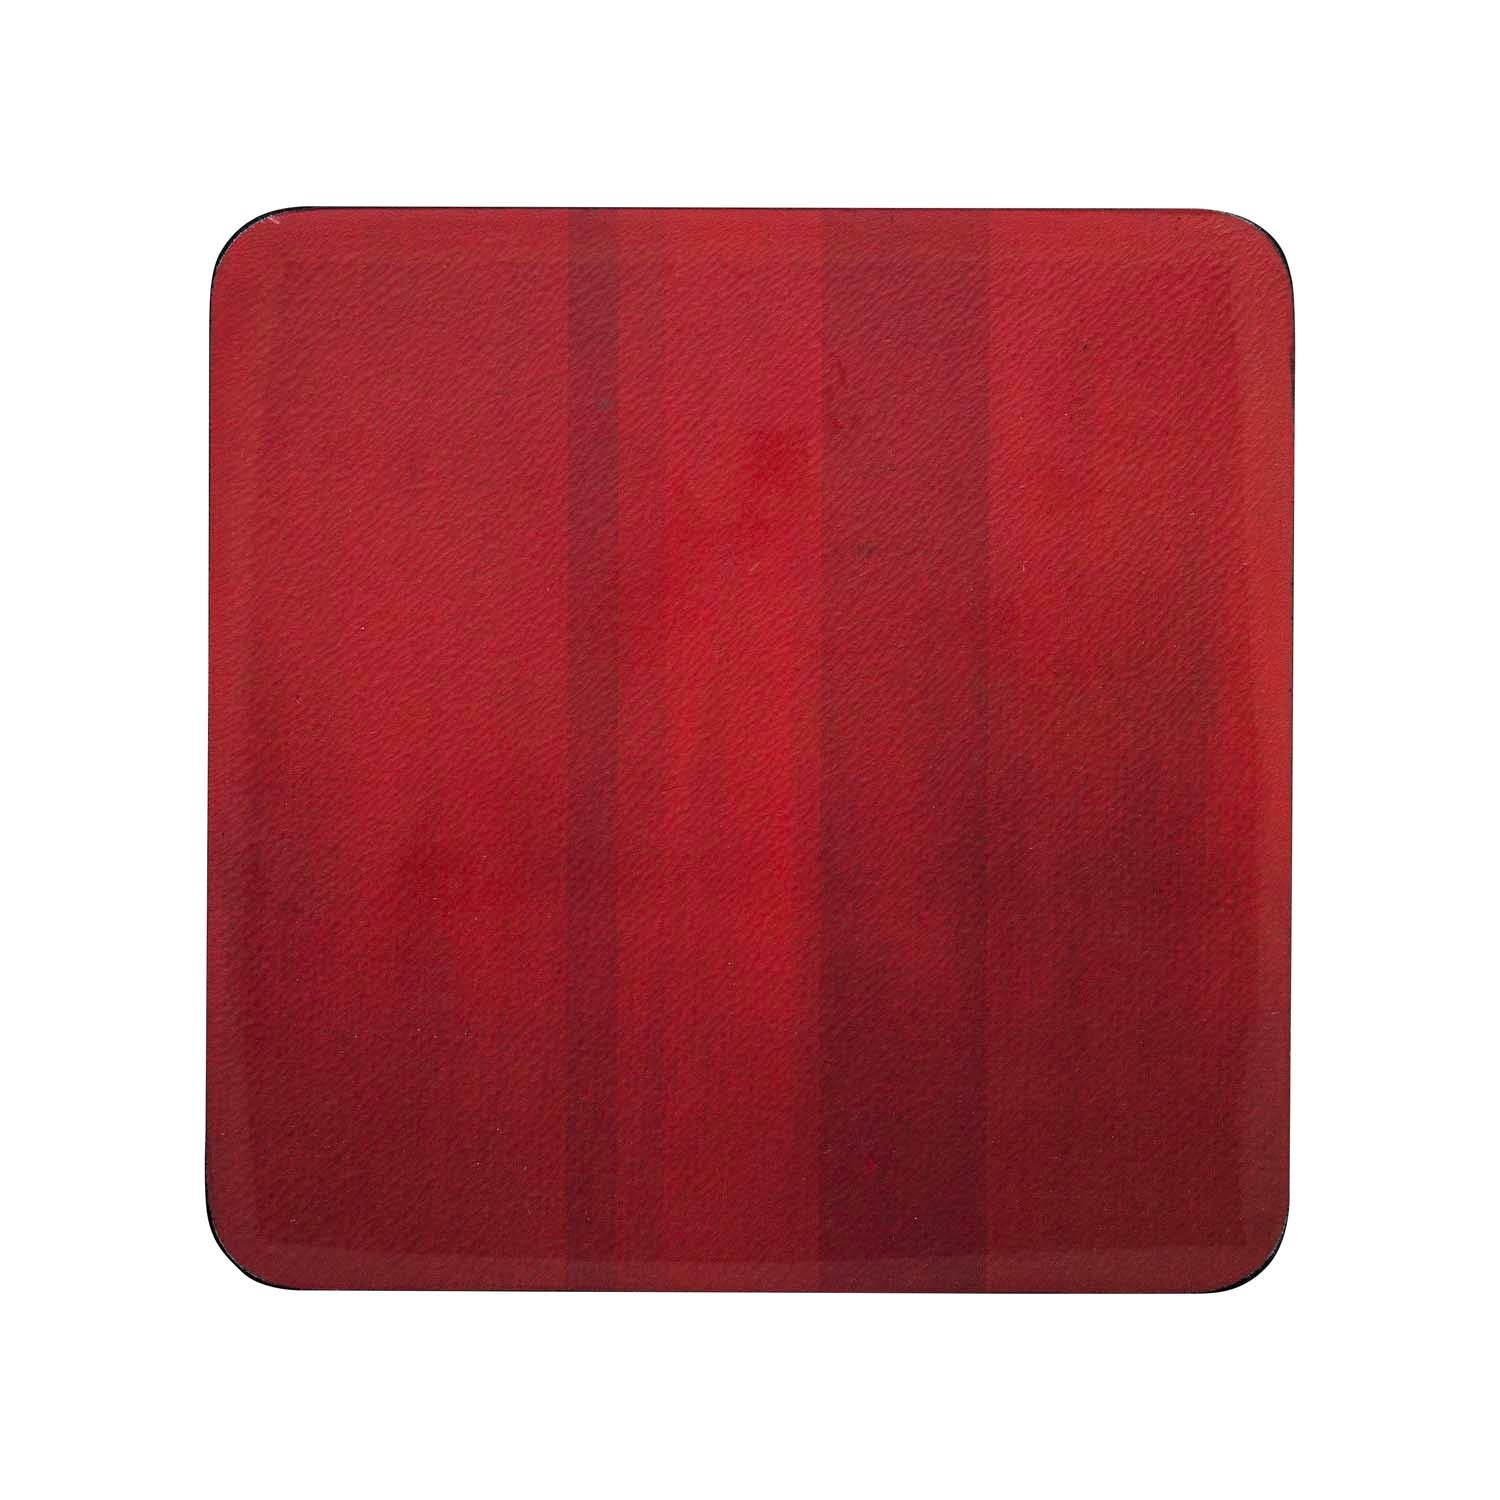 Denby Coasters - Red - Set of 6 1 Shaws Department Stores